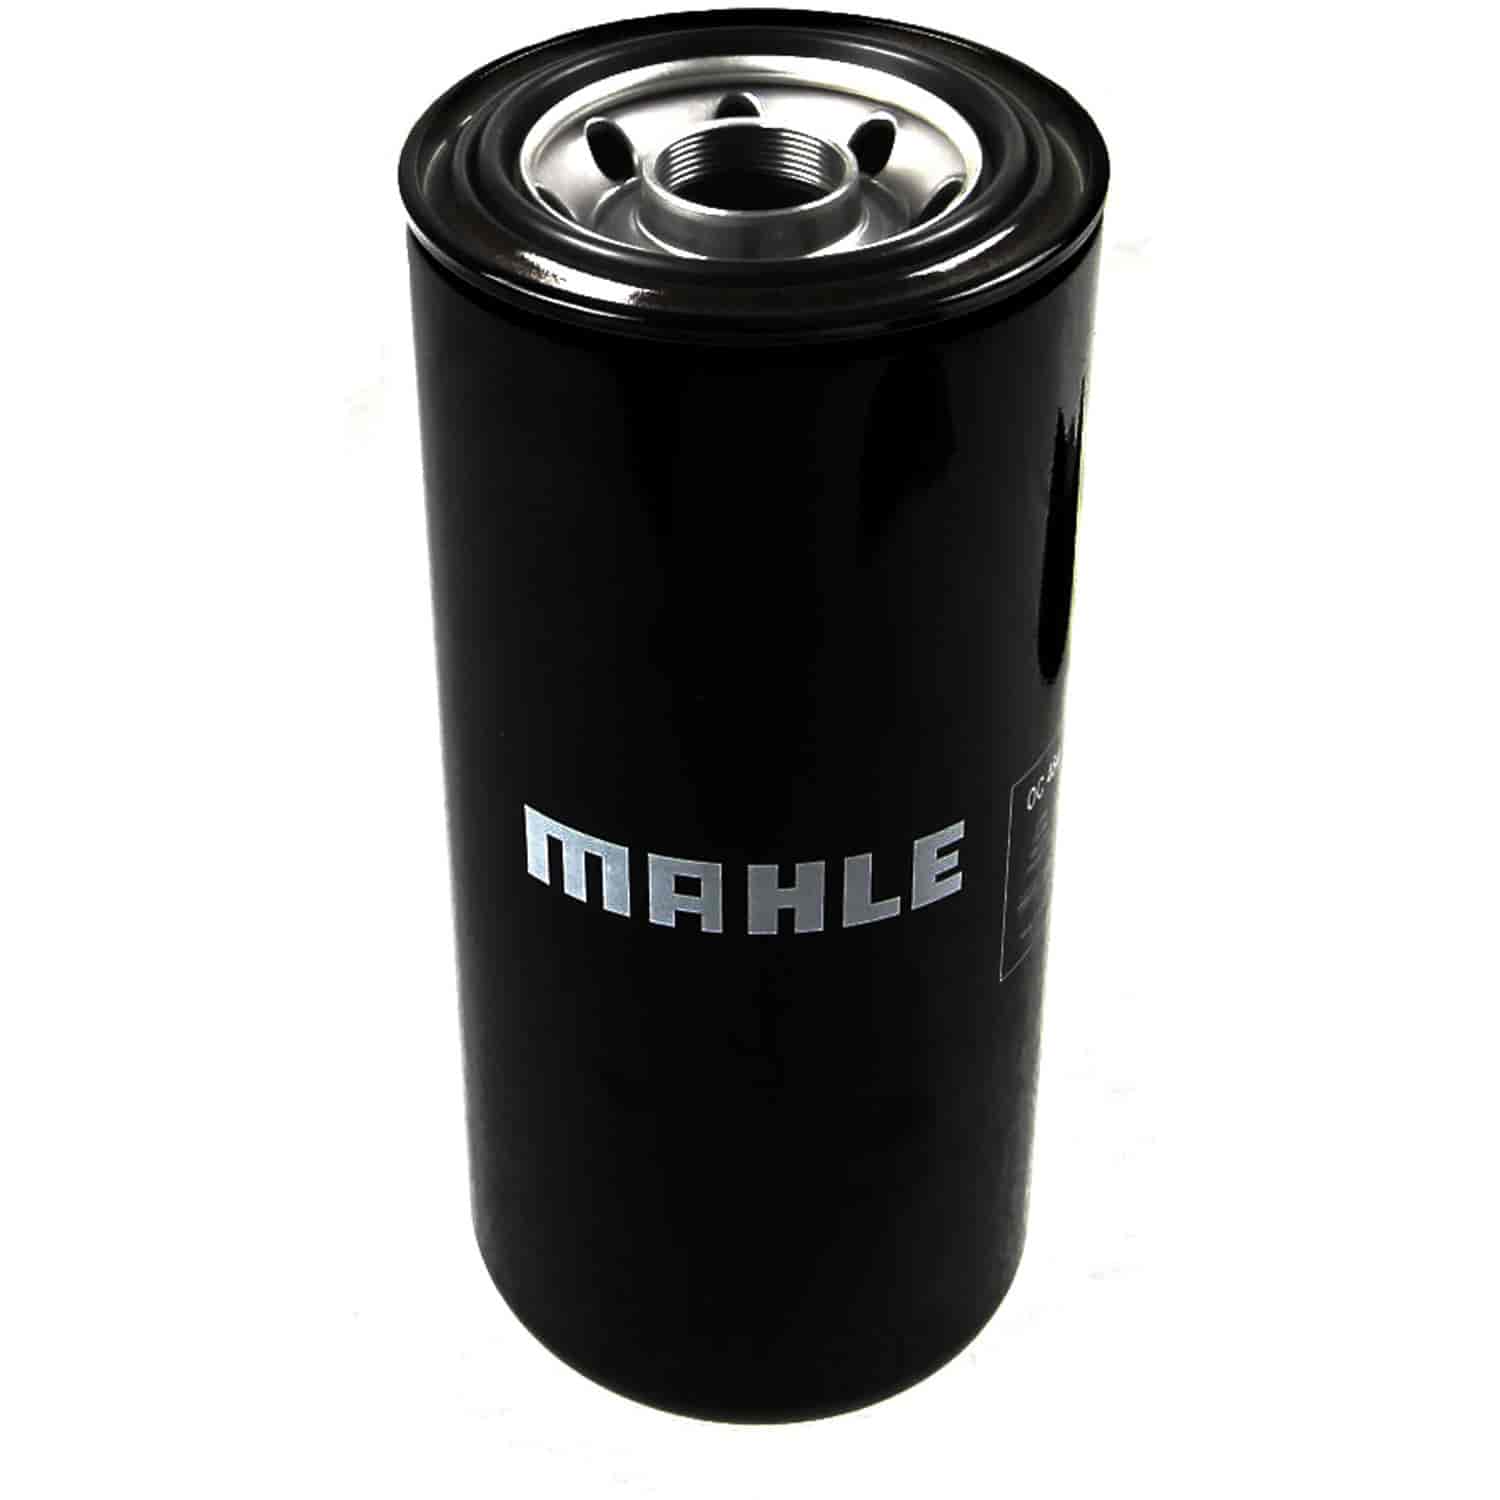 Mahle Oil Filter TRACTOCAMION M.B. FLD-120 MOTOR CATERPILLAR CAT3406